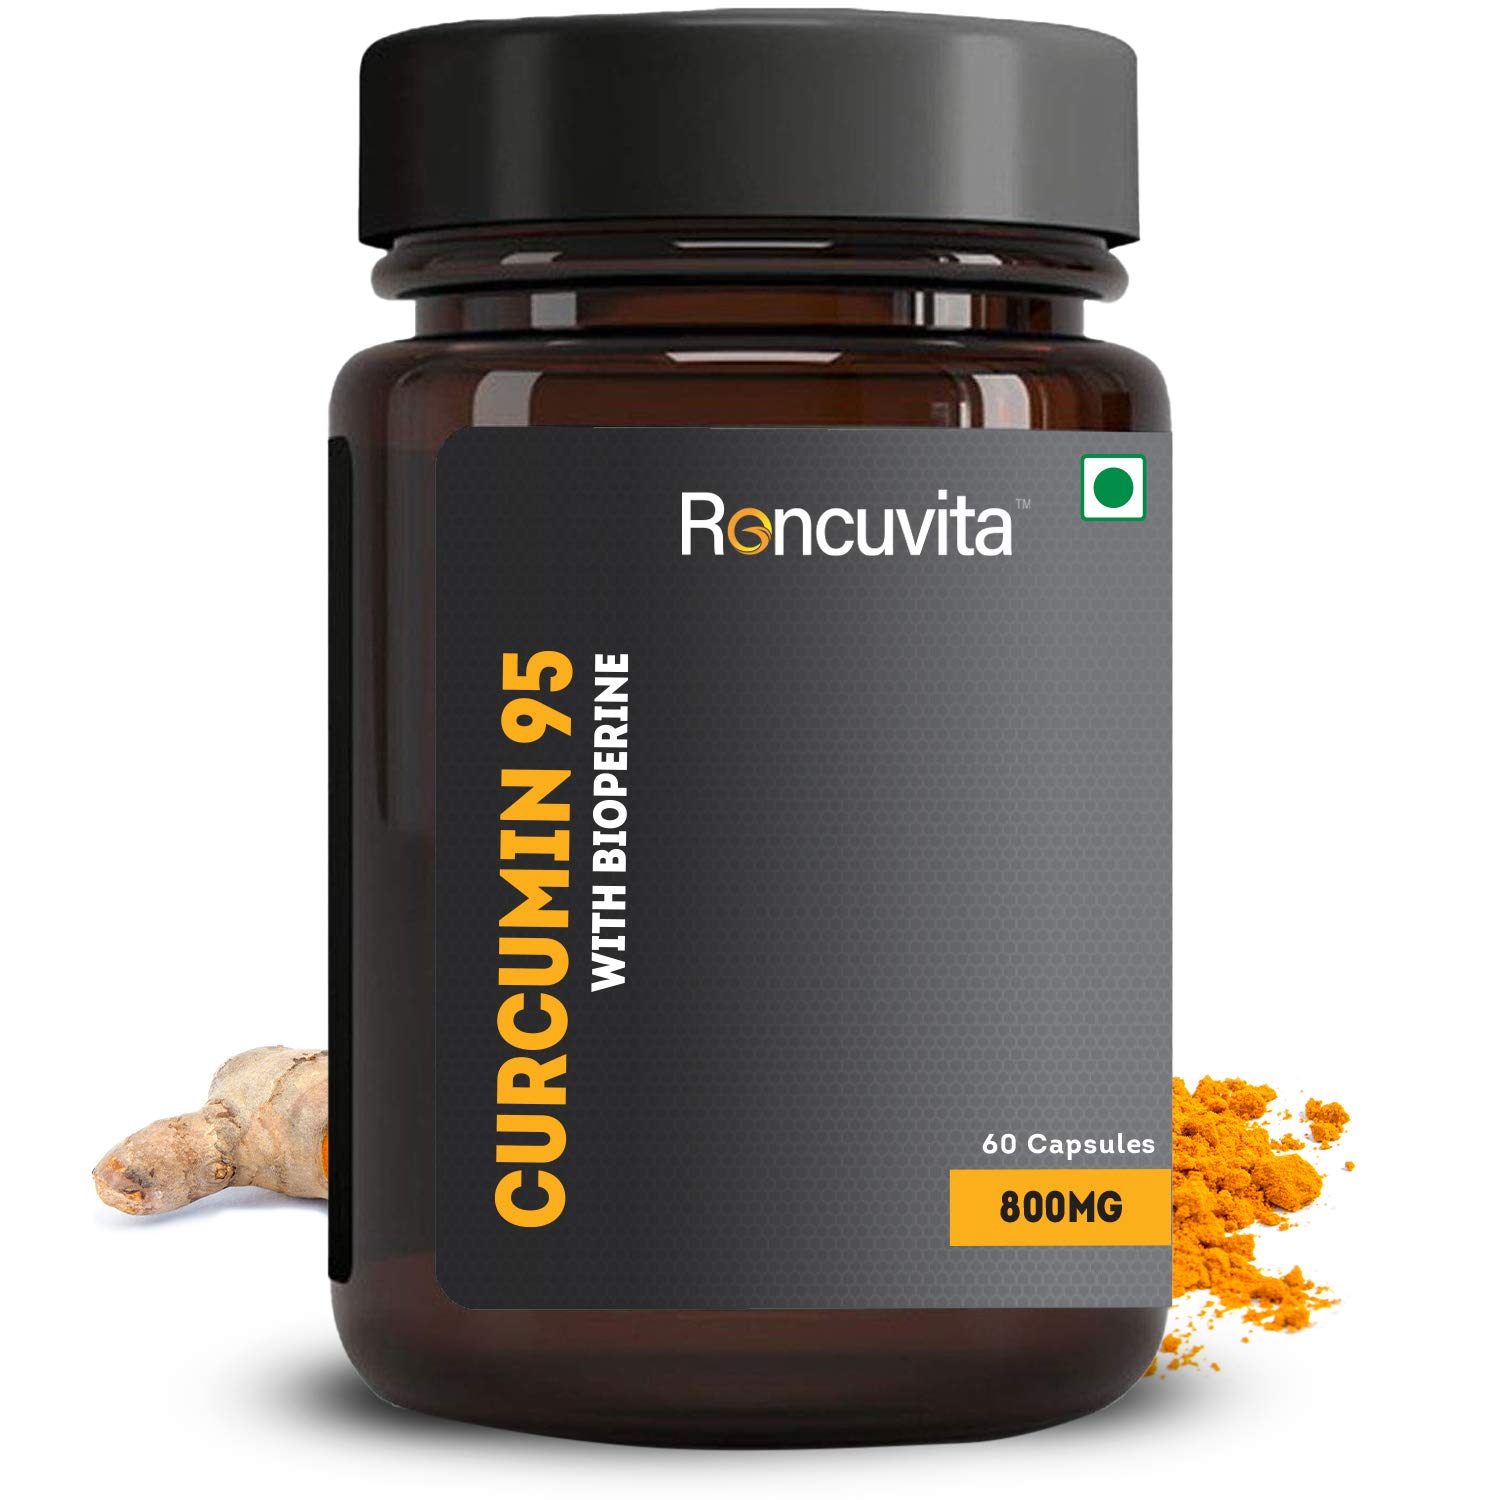 Curcumin is additionally fat solvent, which implies it separates and disintegrates in fat or oil. Th